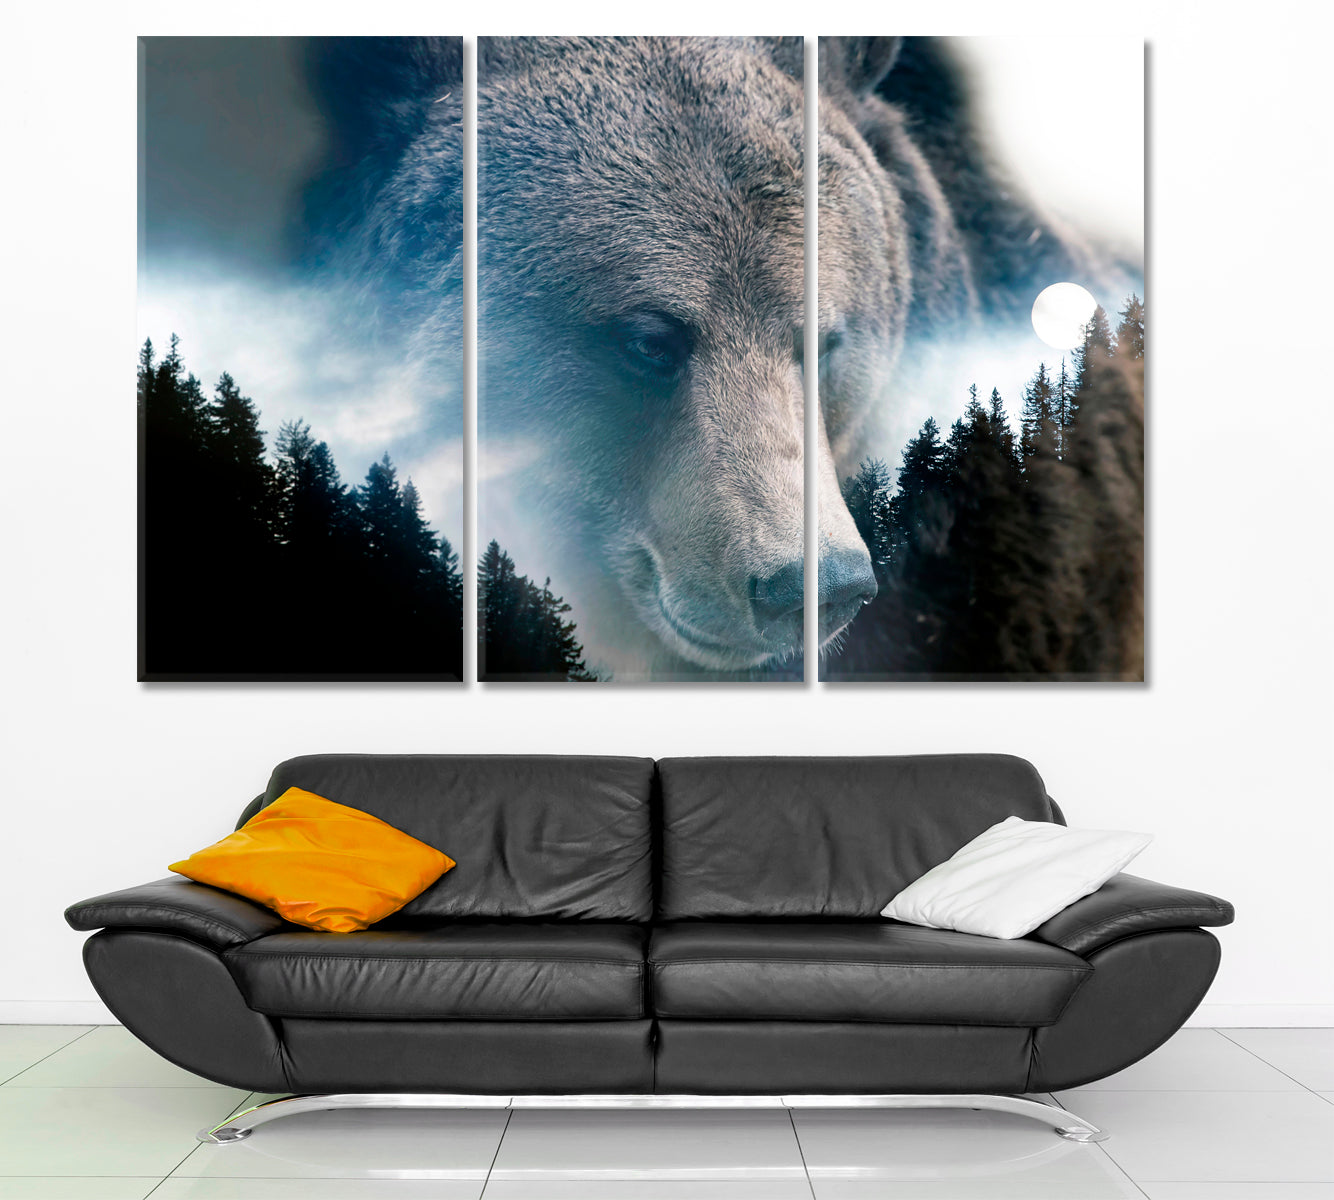 Wild Bear And A Pine Forest Double Exposure Photo Art Artesty 3 panels 36" x 24" 